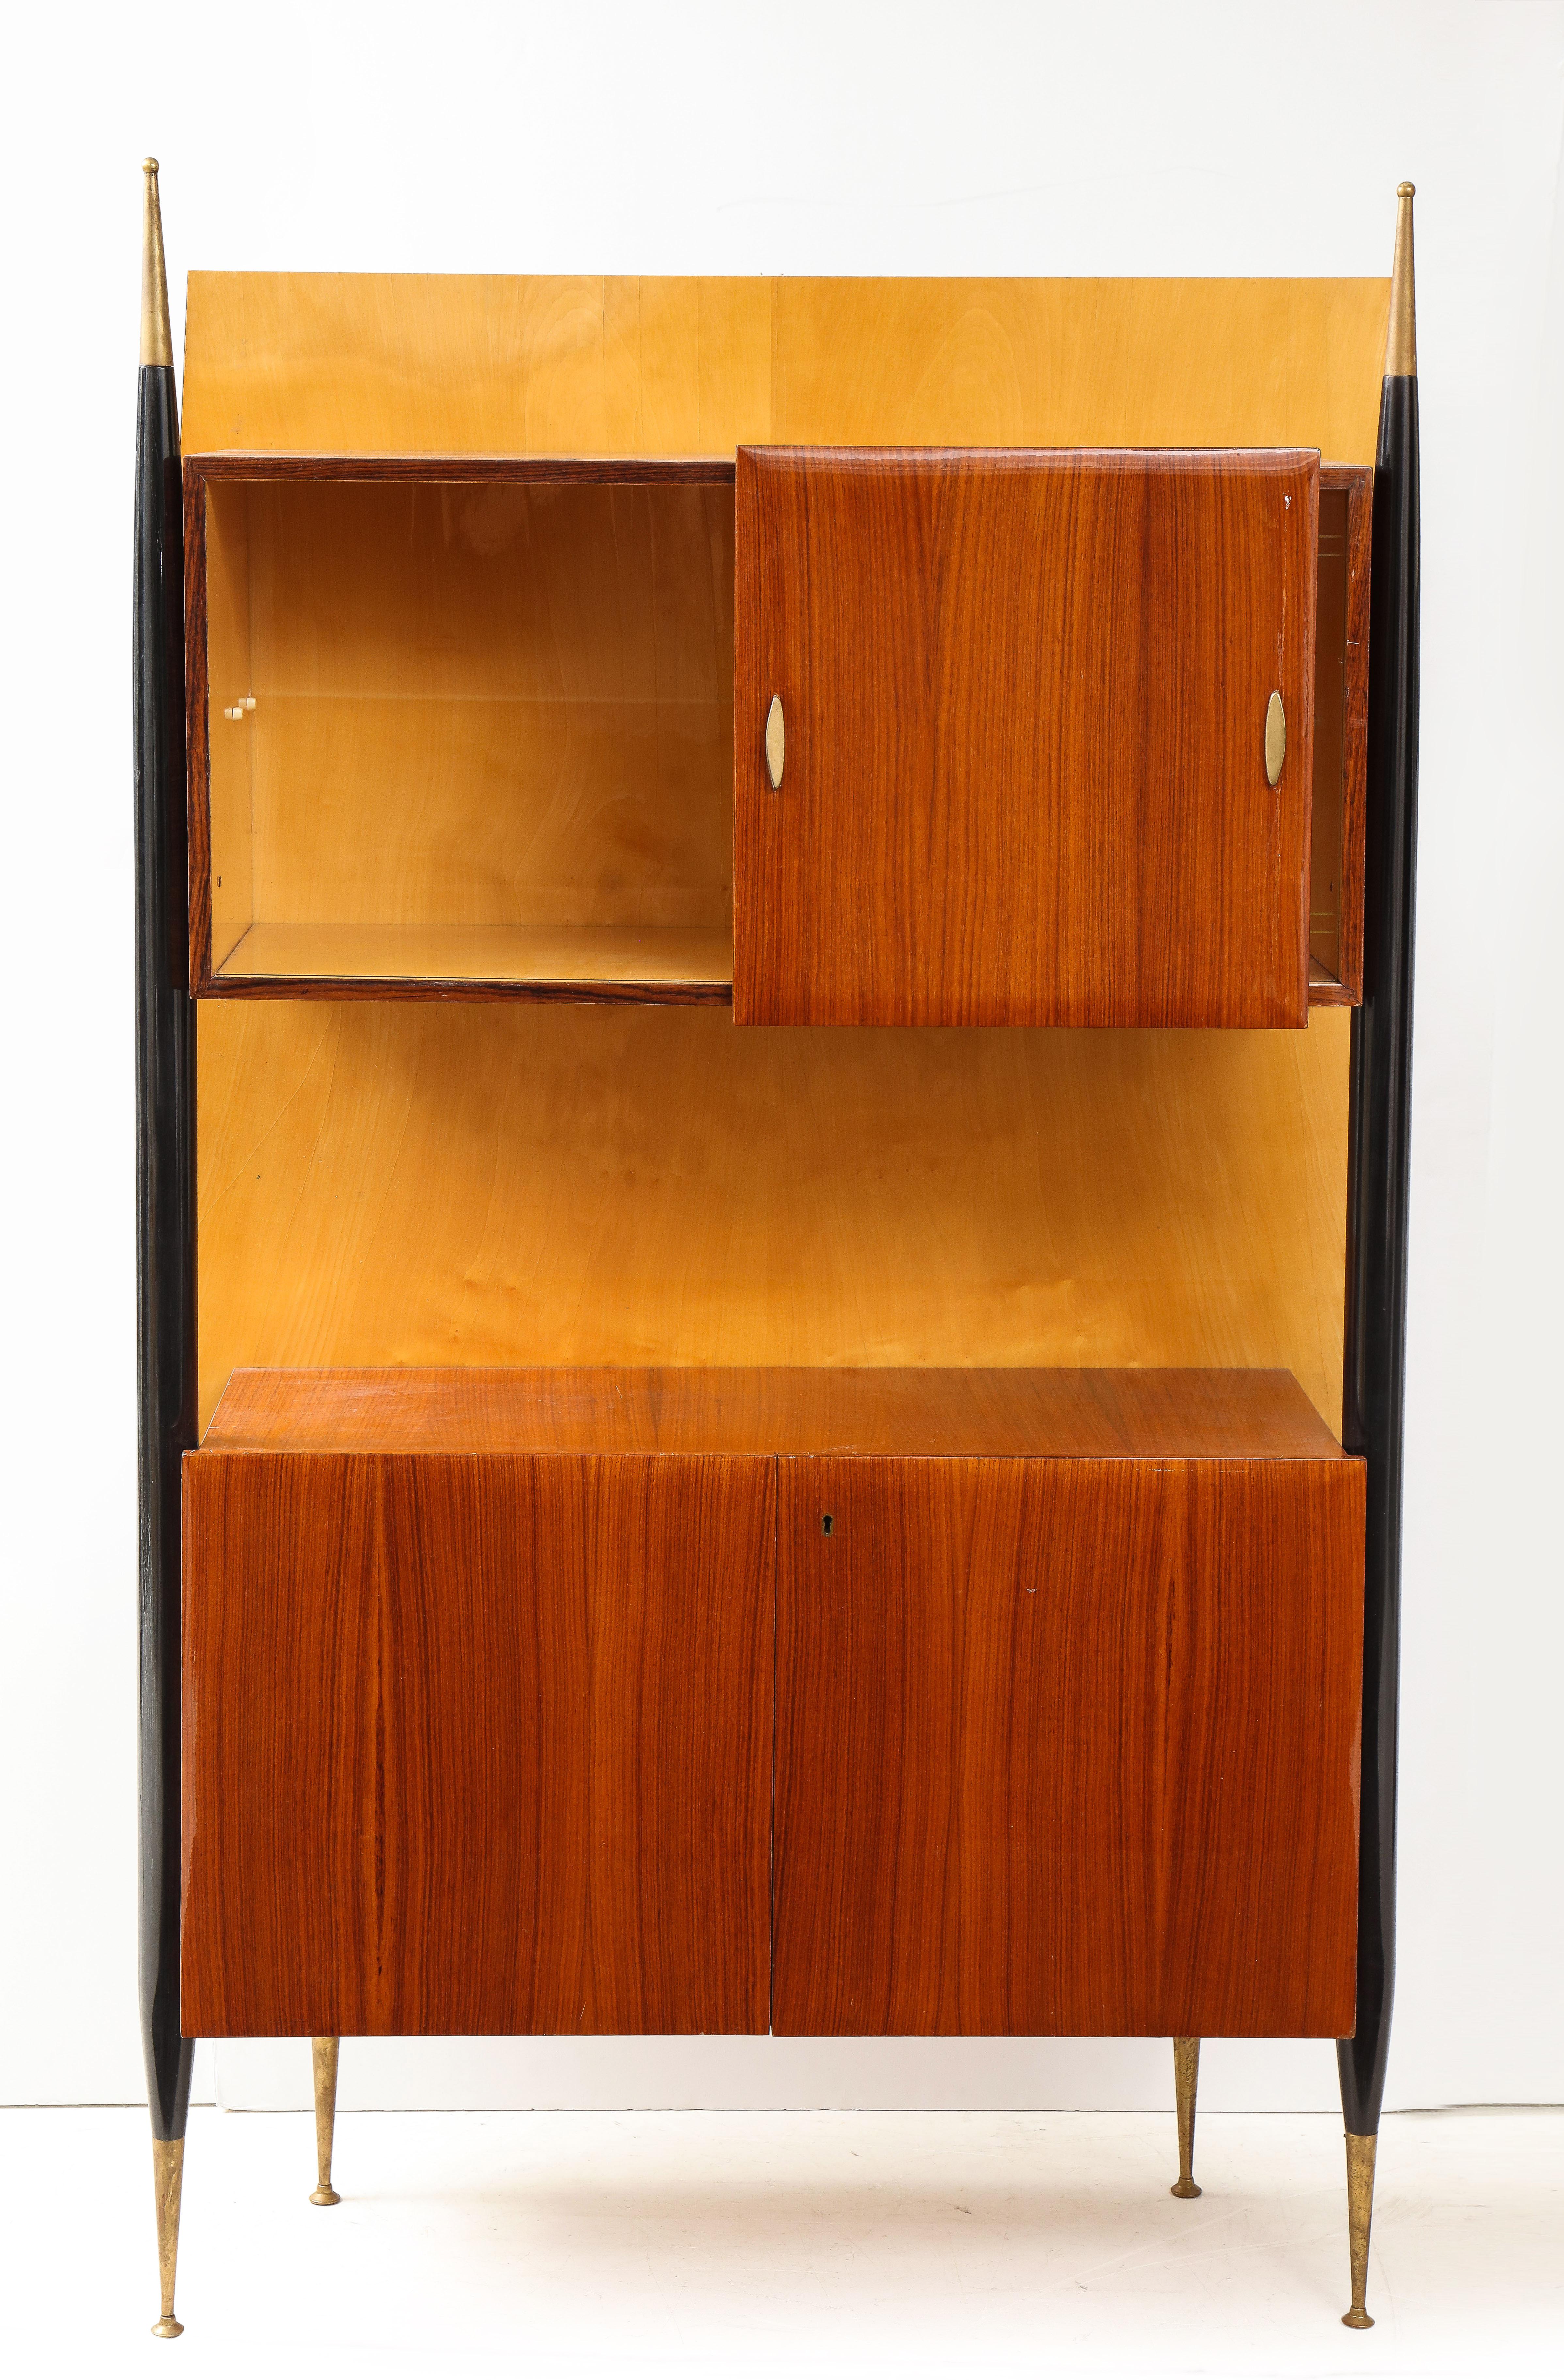 Stylish 1950s Italian Lacquered Mahogany and Sycamore Wall Cabinet In Good Condition For Sale In Montreal, QC